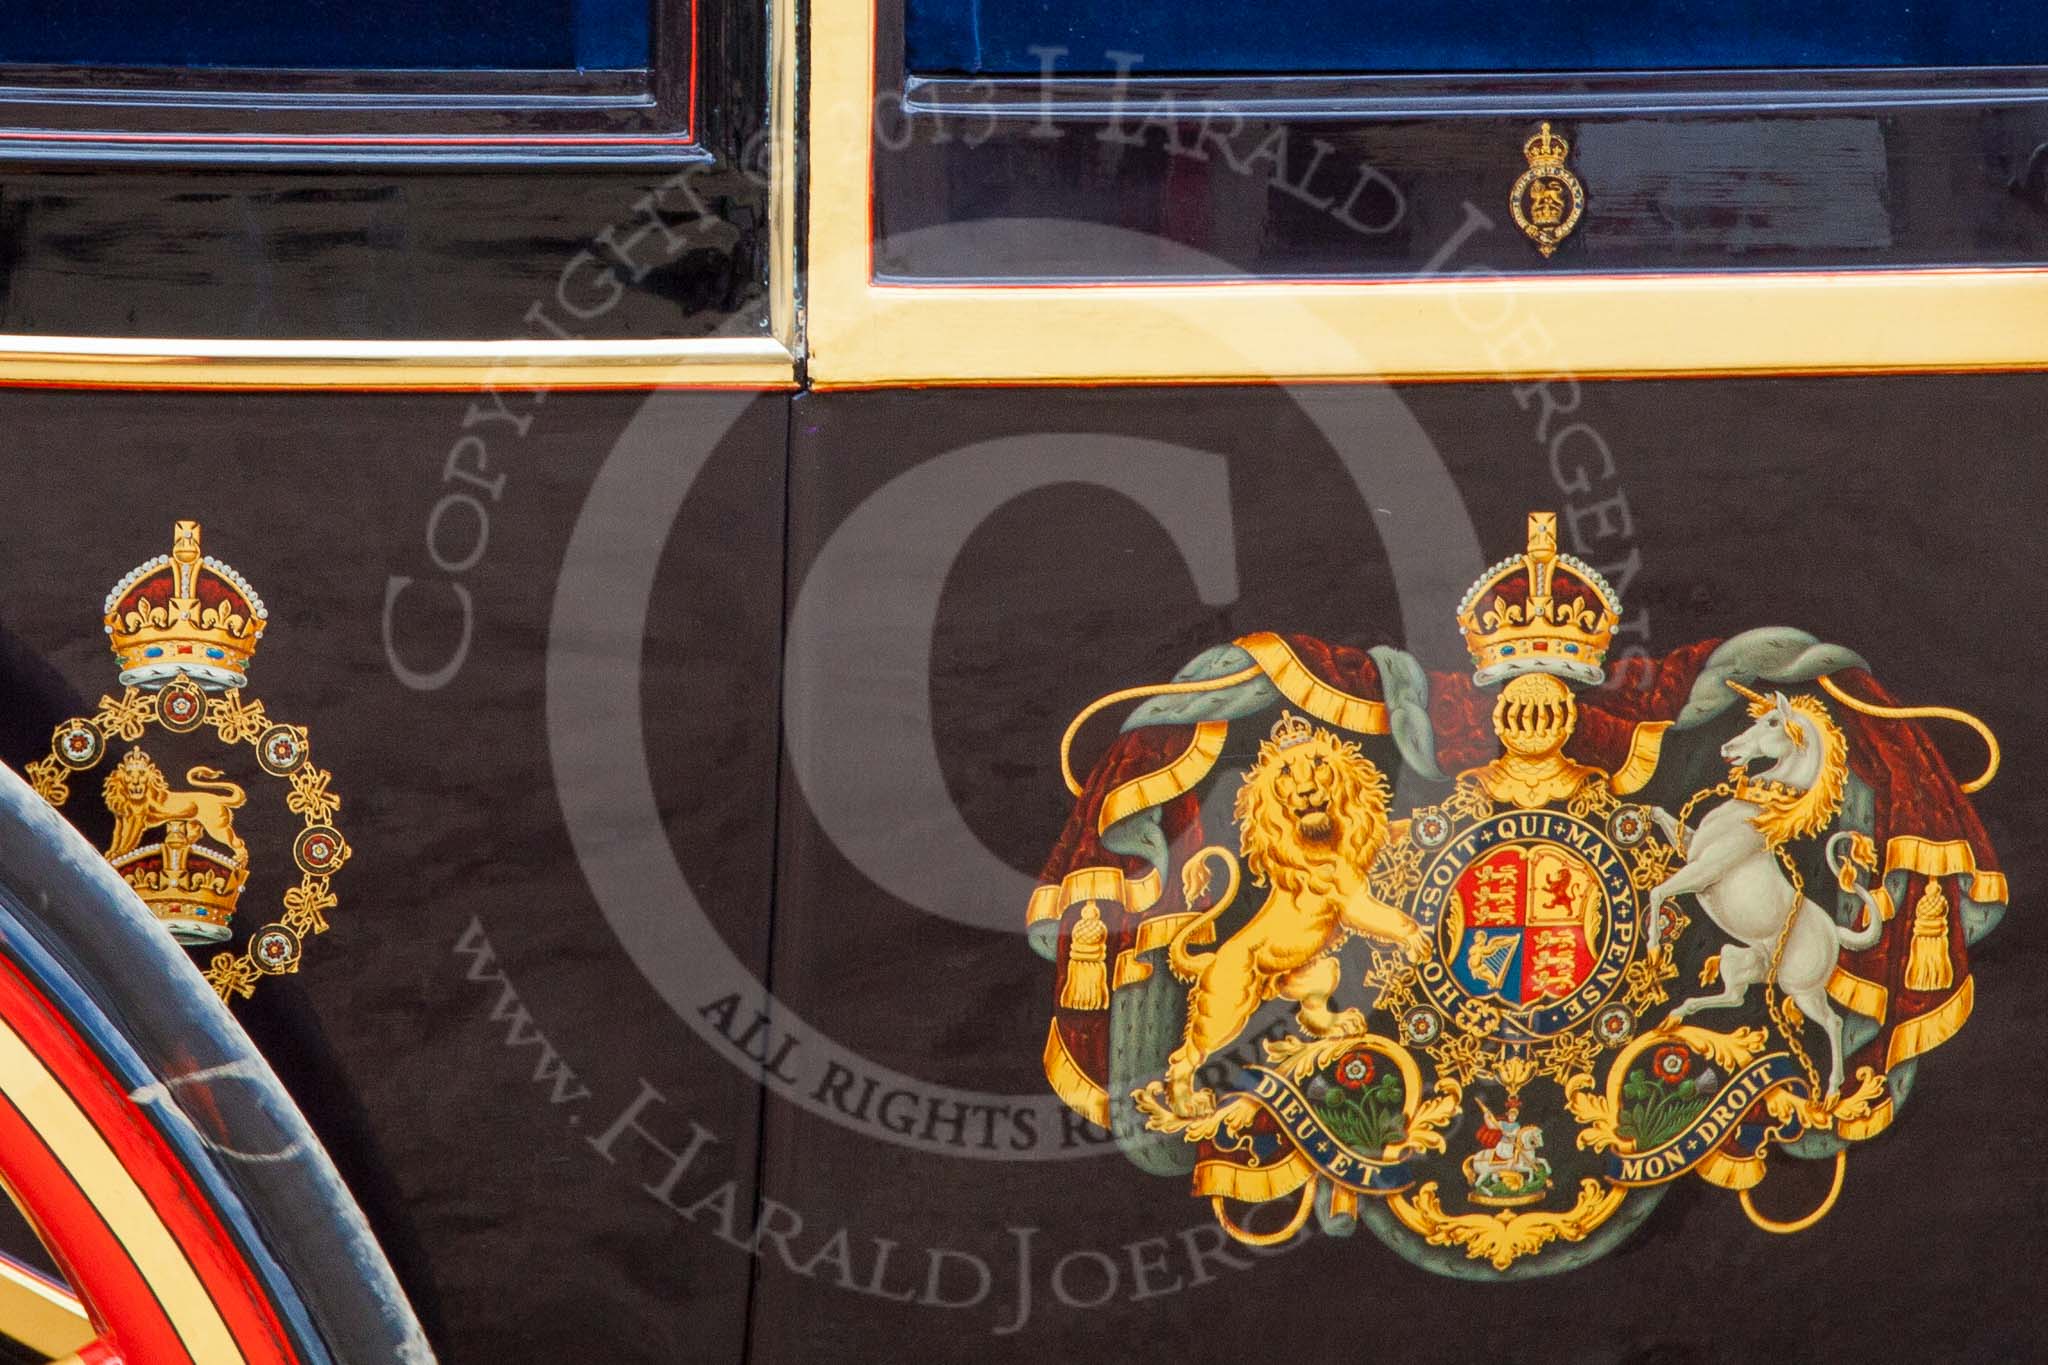 Trooping the Colour 2013: Detail view of the glass coach and the code of arms on the door..
Horse Guards Parade, Westminster,
London SW1,

United Kingdom,
on 15 June 2013 at 12:11, image #820